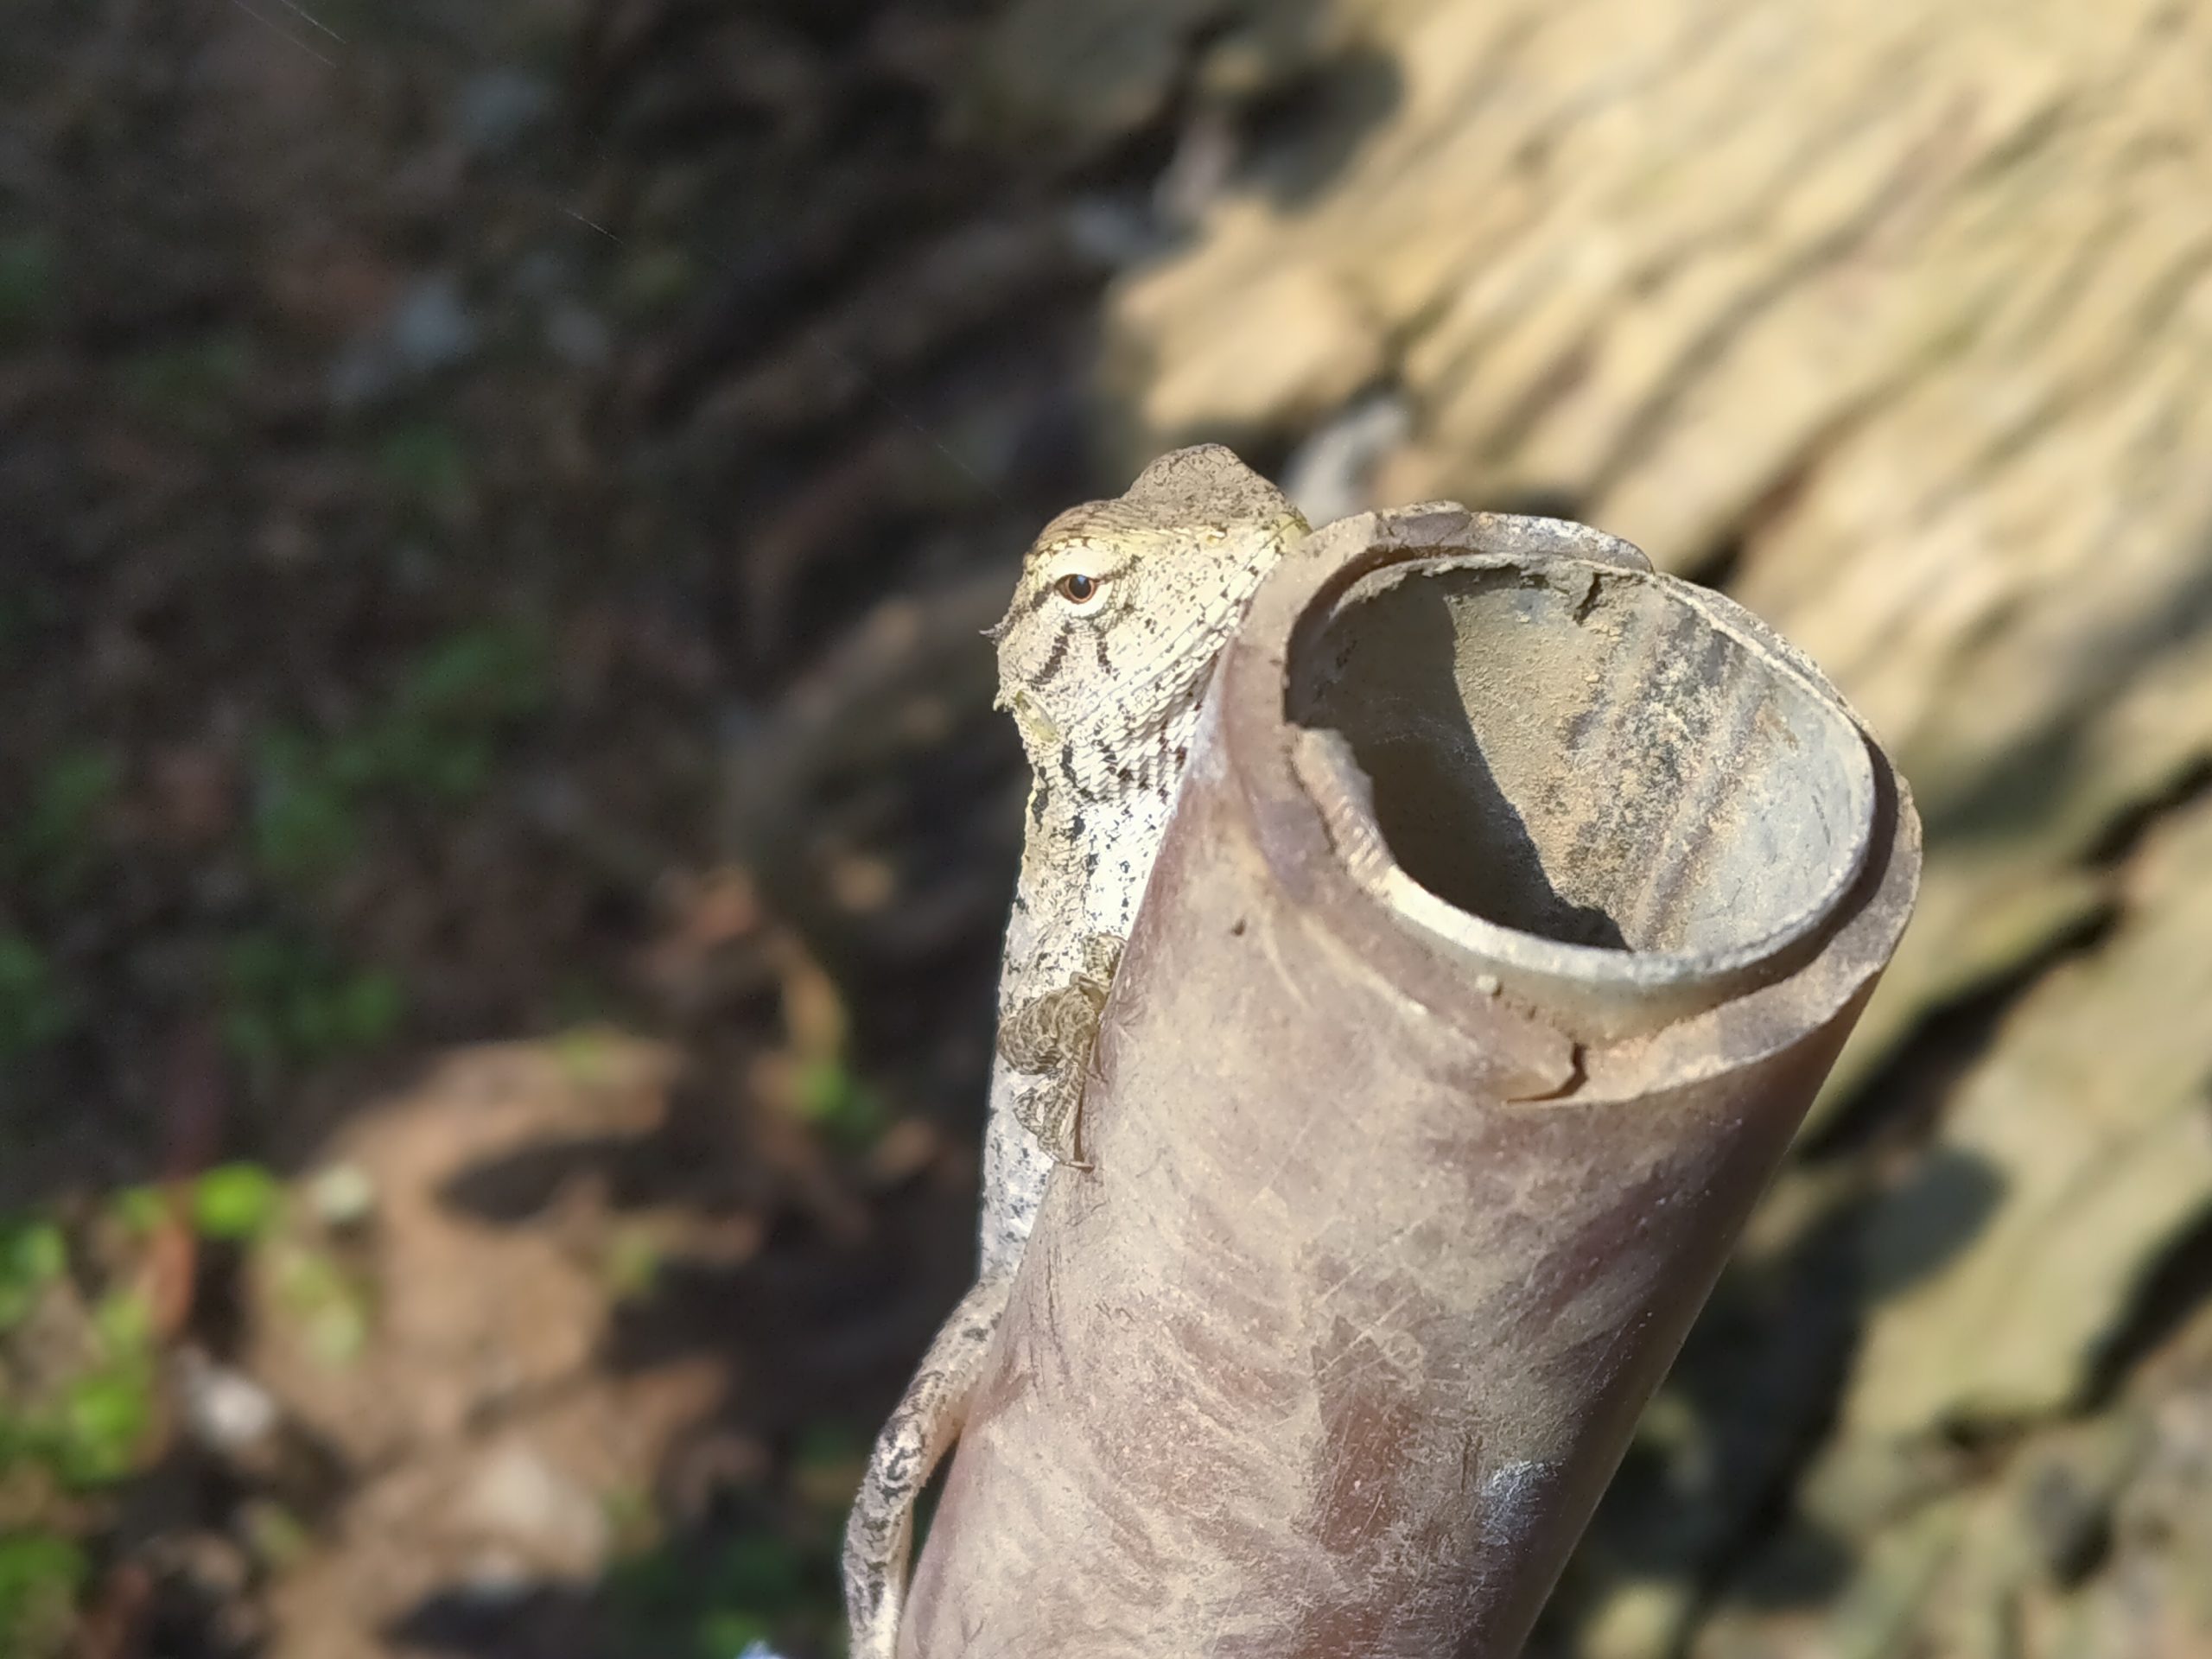 A lizard on a pipe